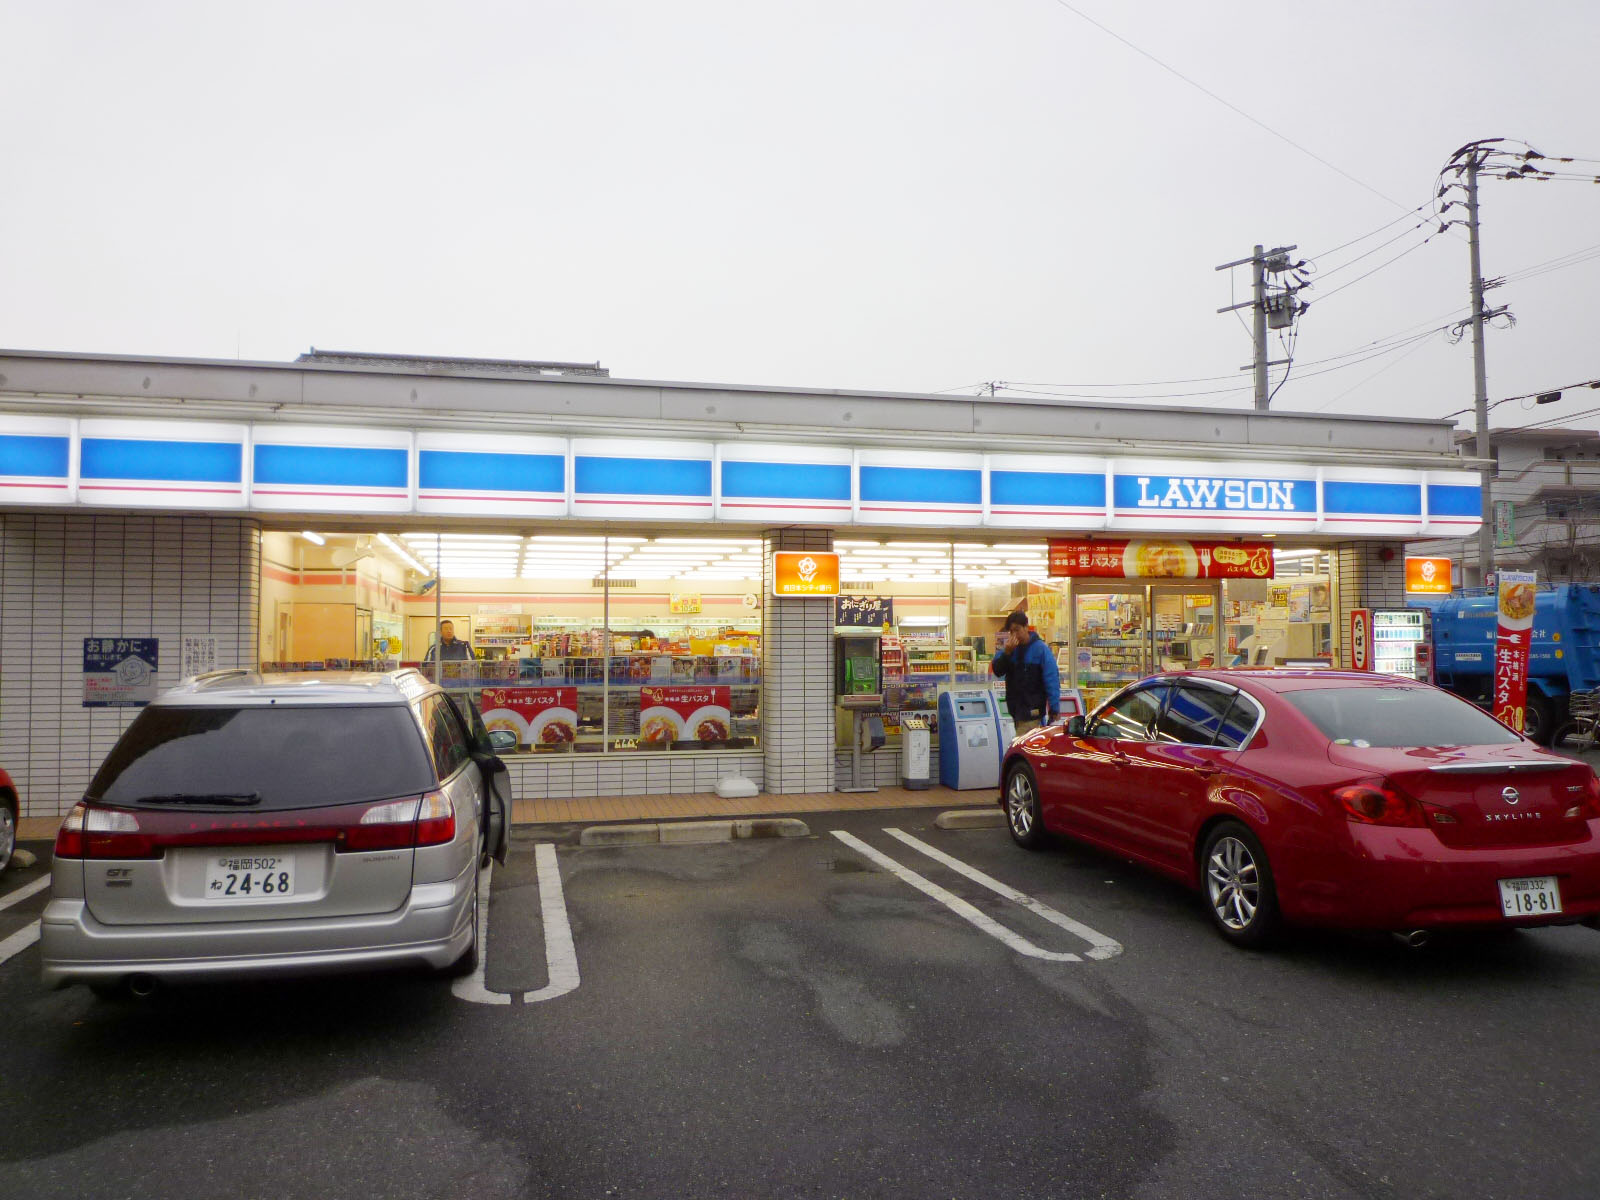 Convenience store. Lawson Meinohama 4-chome up (convenience store) 167m